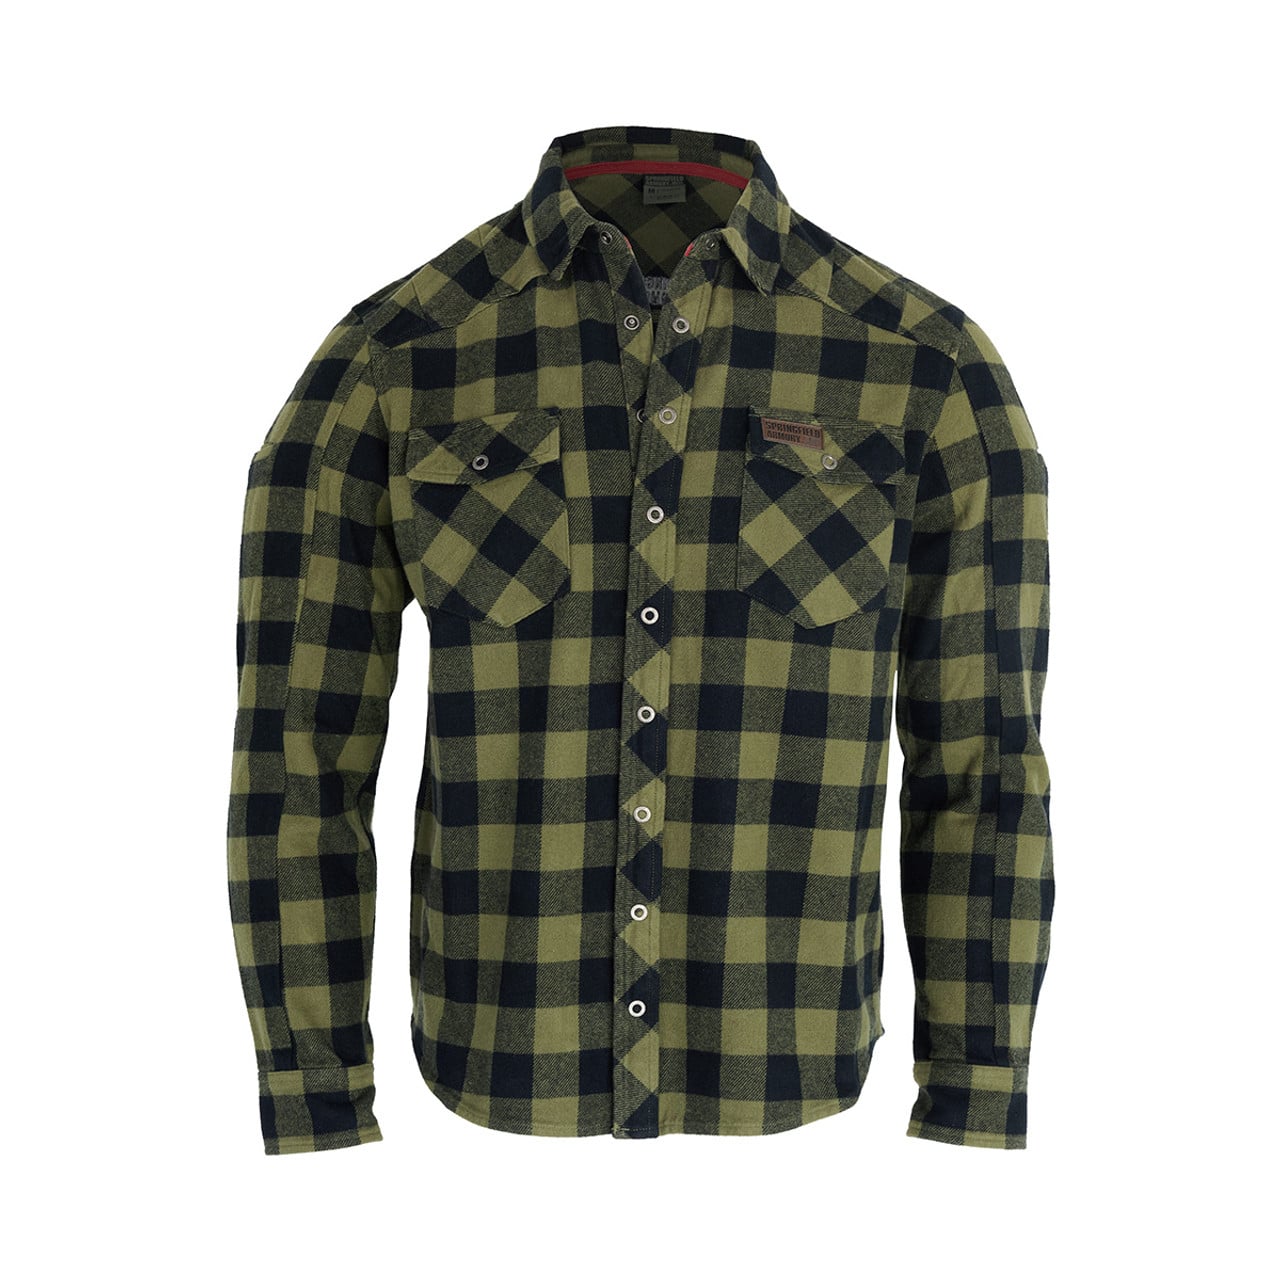 springfield armory cotton flannel shirt christmas gift